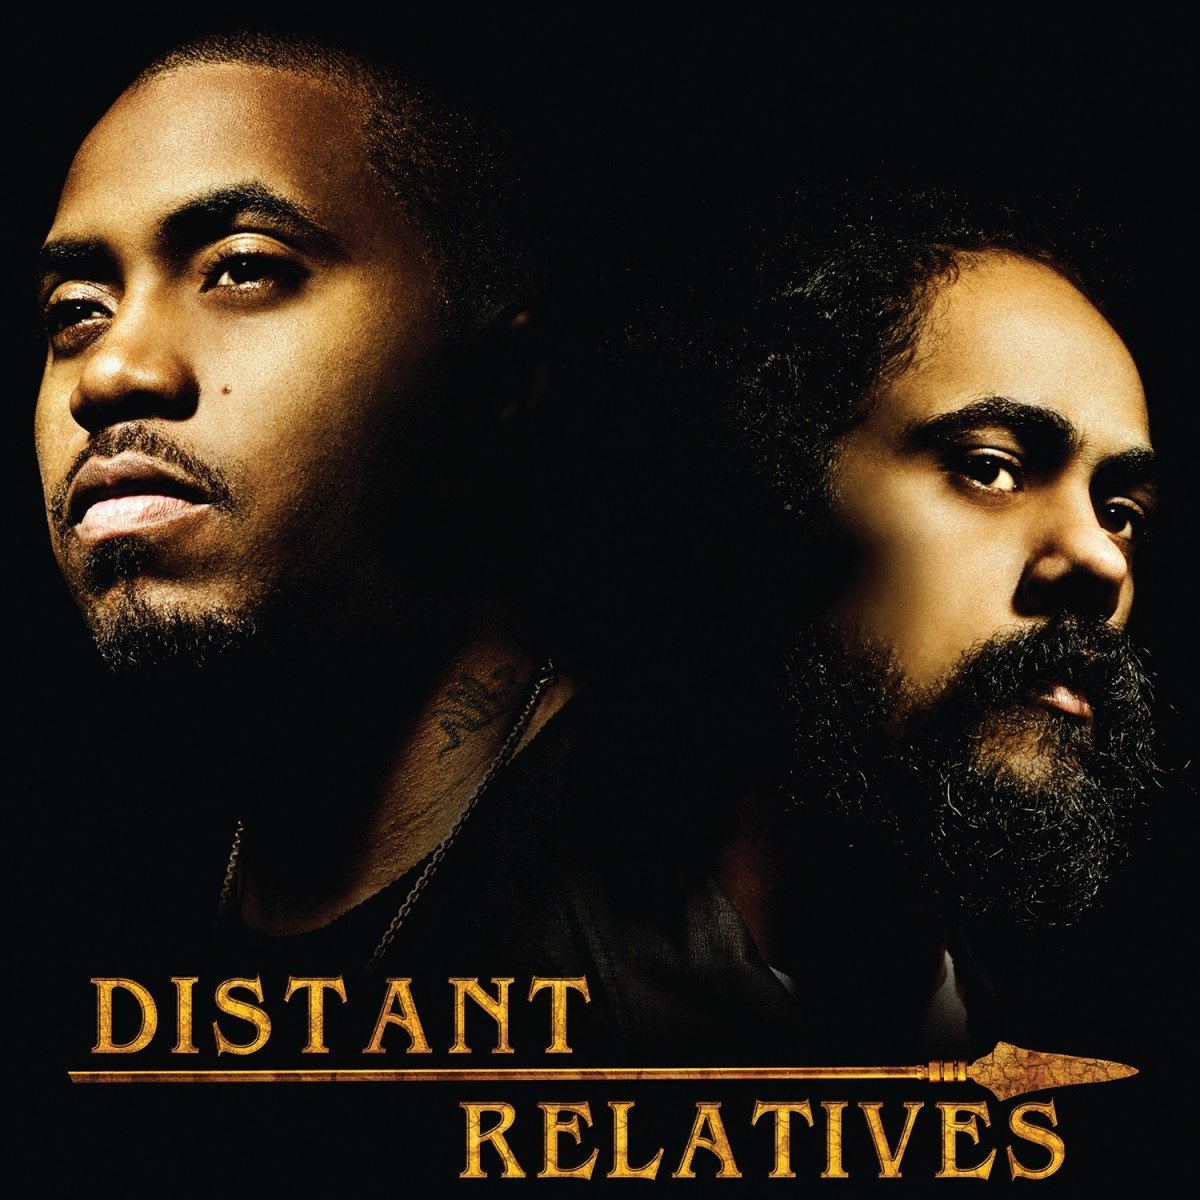 Today in Hip Hop History:
Nas and Damian Marley released the album “Distant Relatives,” May 18, 2010

I still love this album!   The best of both worlds right here. Legendary rapper and reggae artist…

Just

Wow

Learn that #HipHopHistory 😎